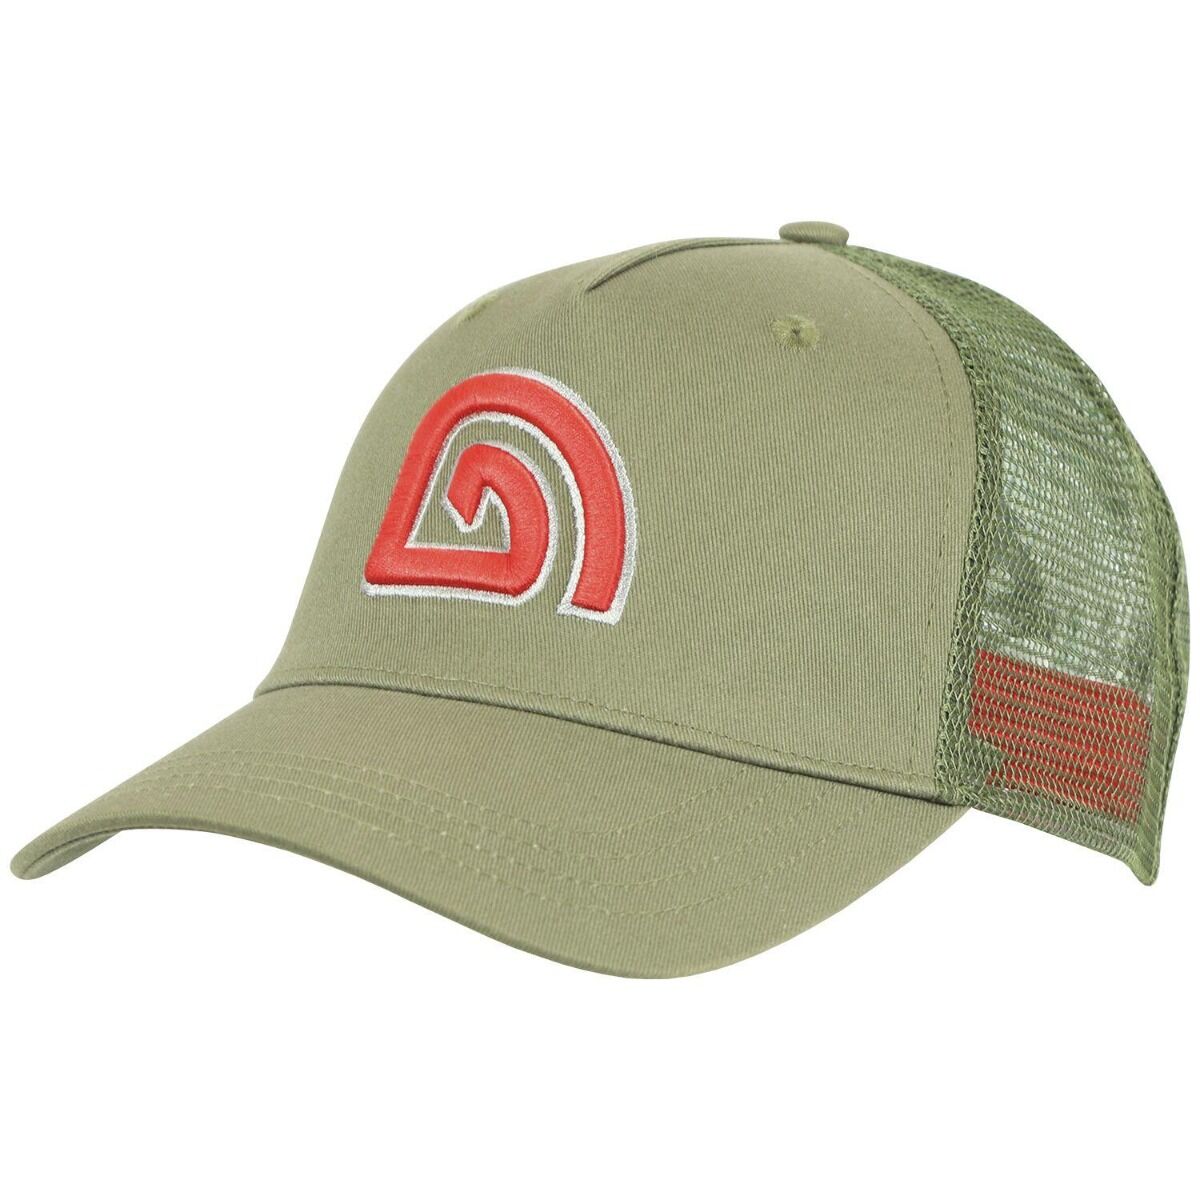 Trakker Trucker Cap ONE SIZE *NEW* 207645 Carp Fishing Clothing *Free*Delivery* 